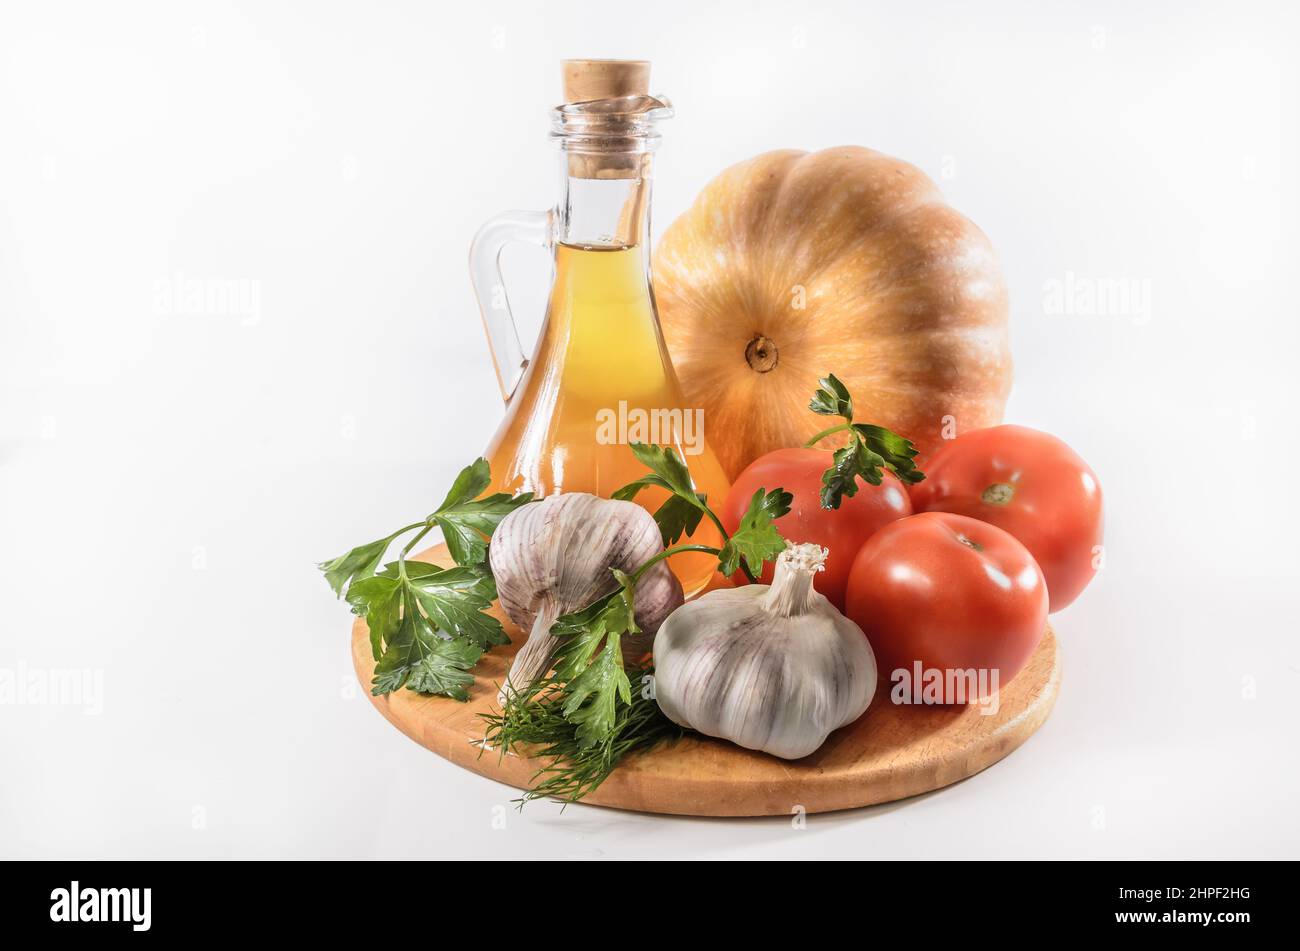 pumpkin, tomatoes and other ingredients for a vegetable dish on a light background Stock Photo